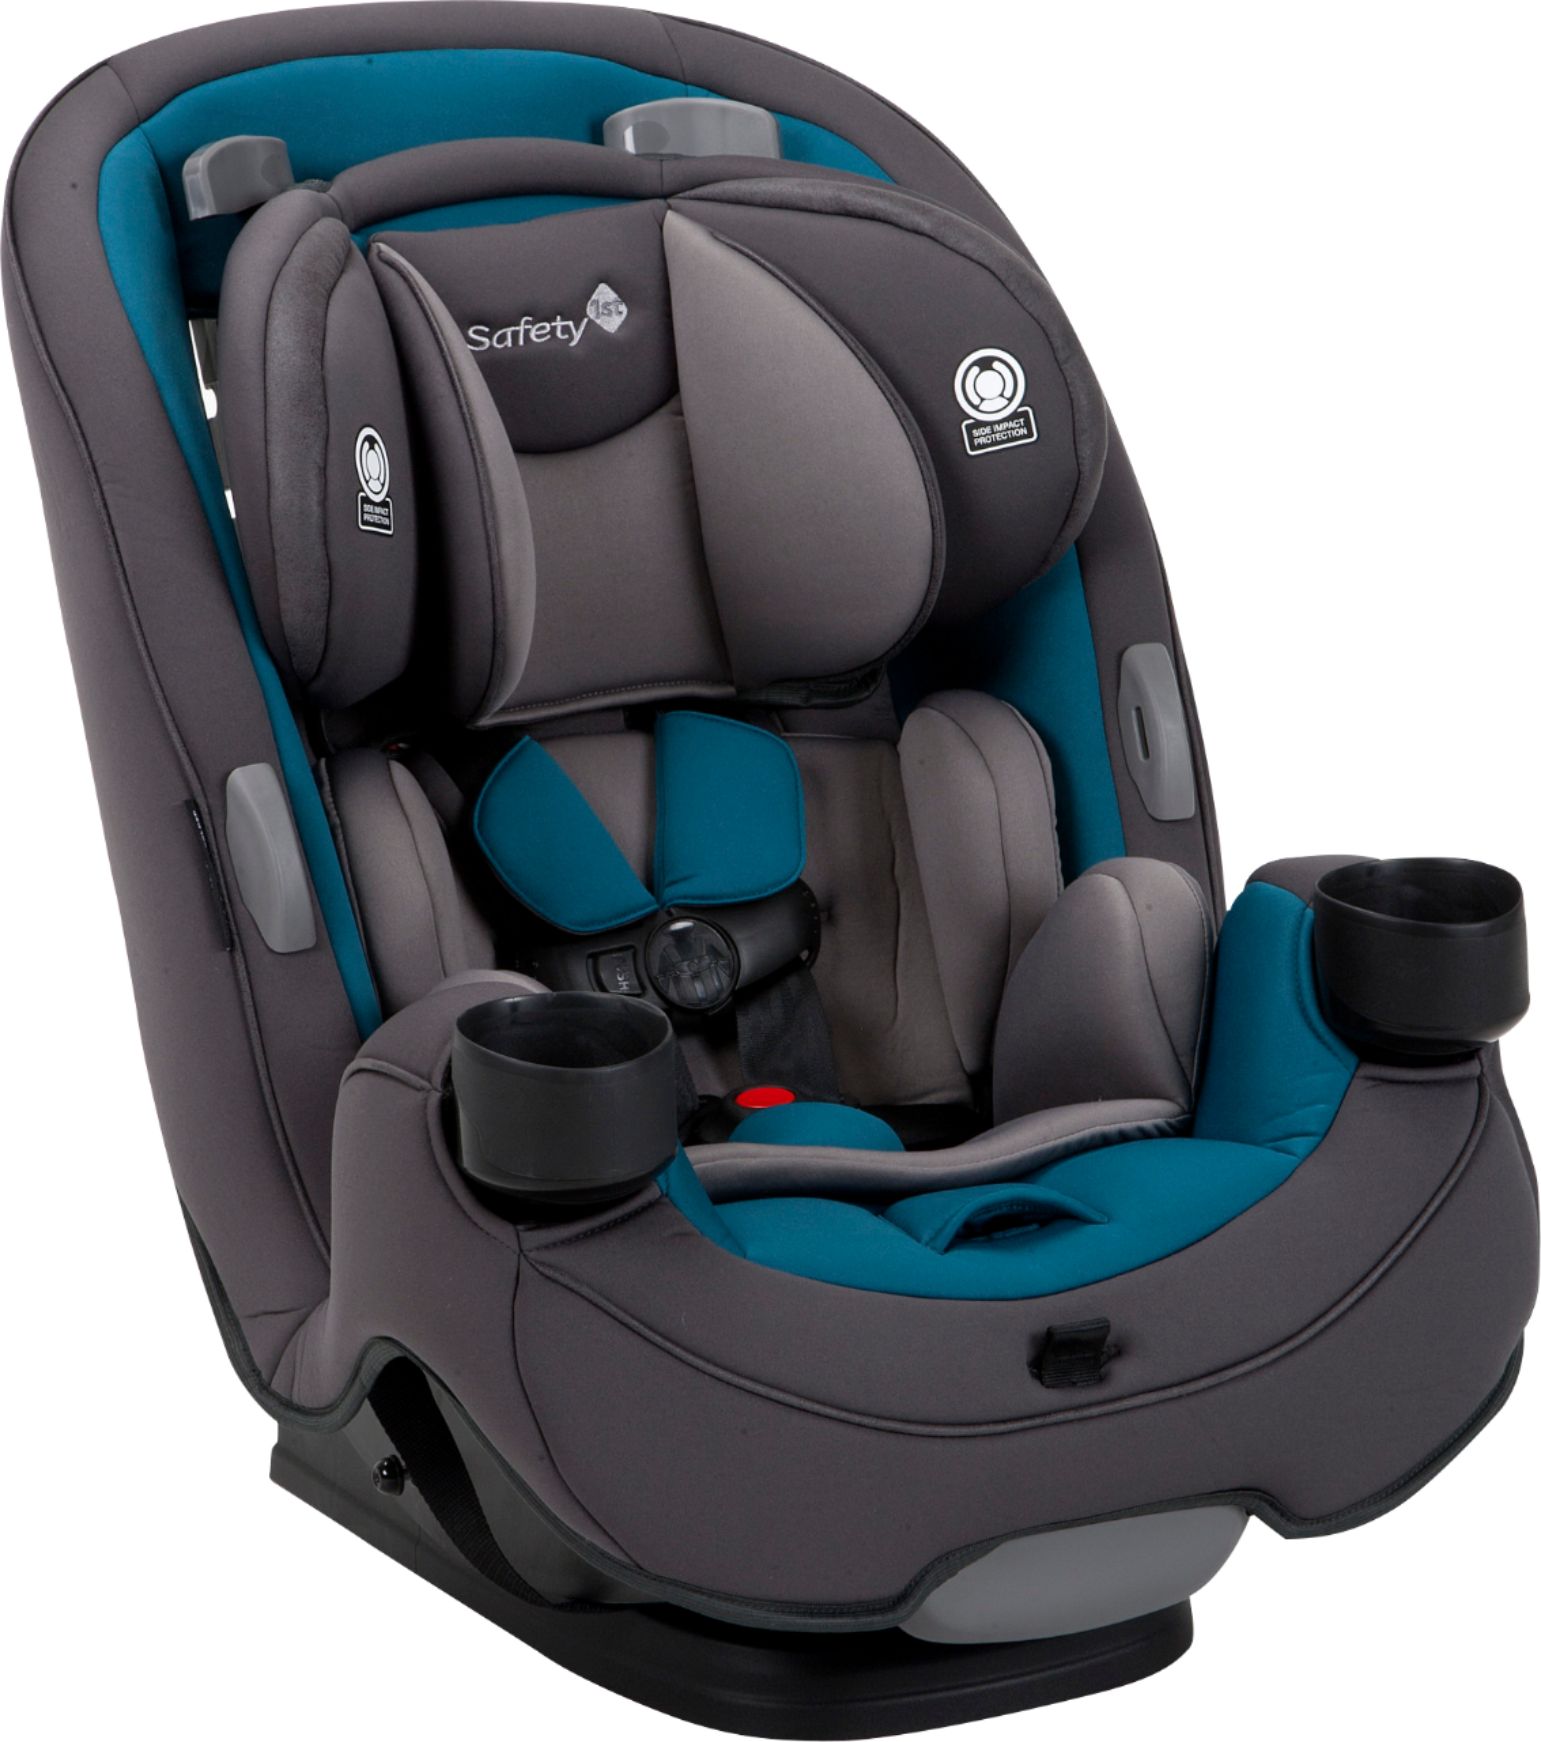 Angle View: Safety 1st - Grow and Go™ All-in-One Convertible Car Seat - Blue